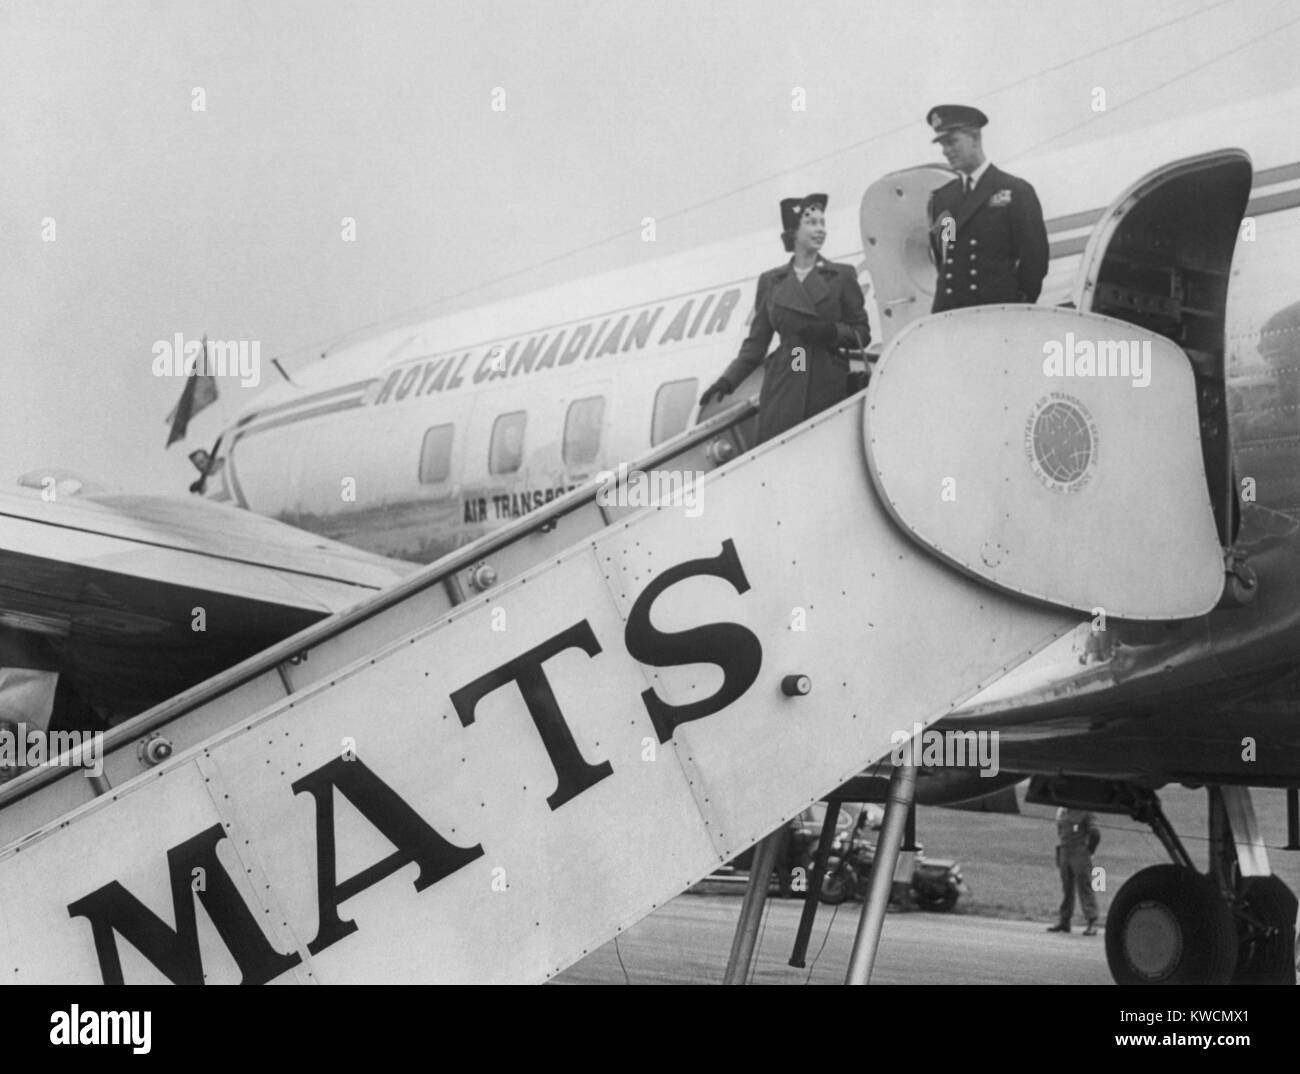 Princess Elizabeth and Prince Philip arrive at Washington's National Airport. Oct. 31, 1951. - (BSLOC 2014 15 38) Stock Photo